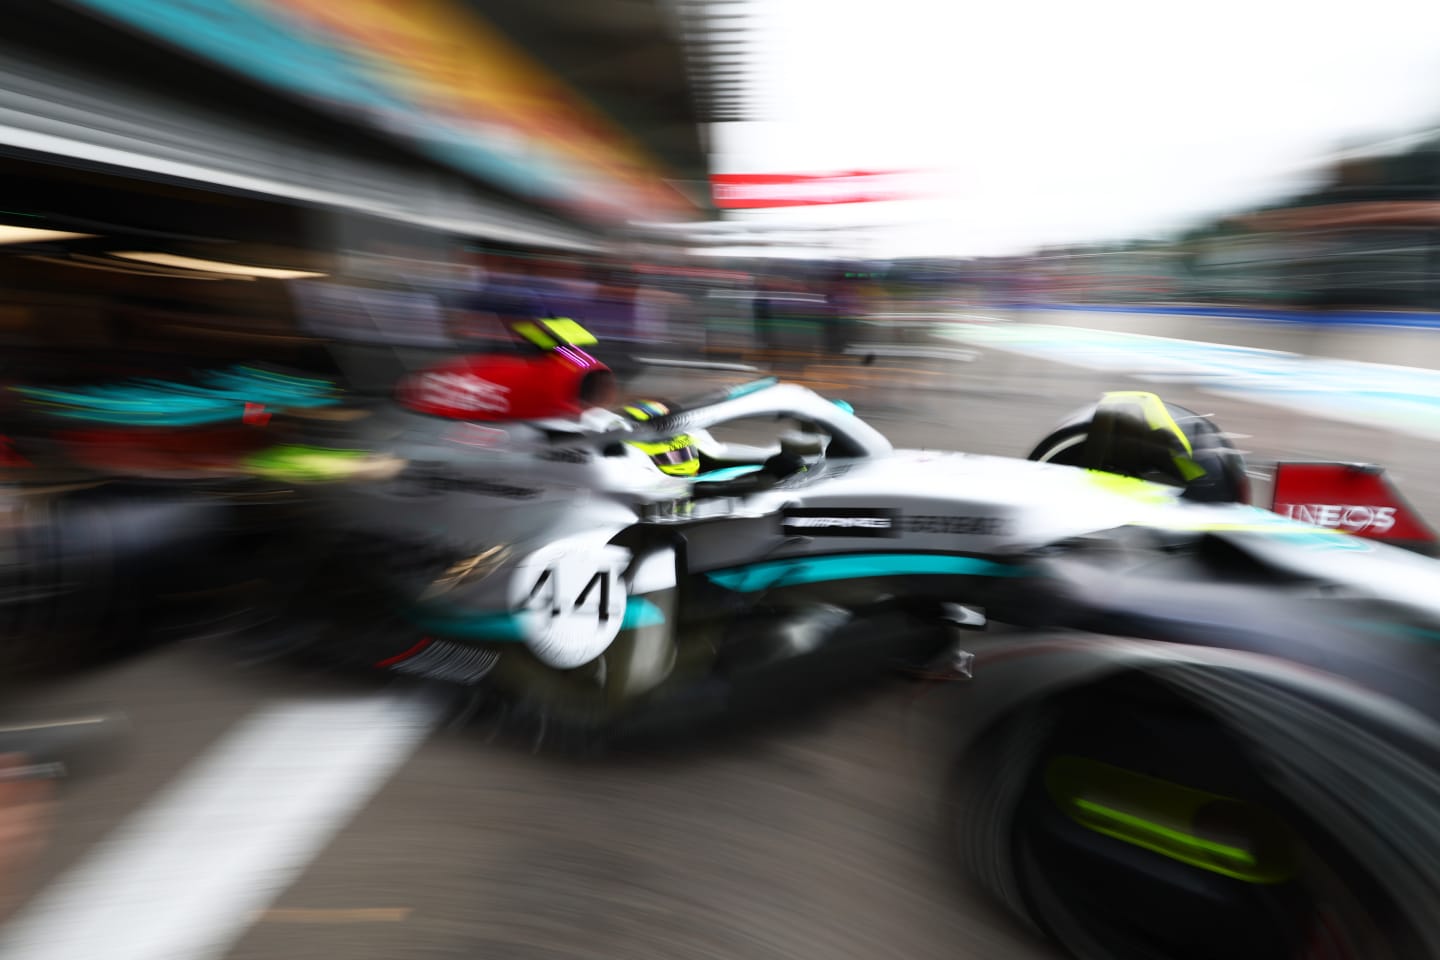 SPA, BELGIUM - AUGUST 26: Lewis Hamilton of Great Britain driving the (44) Mercedes AMG Petronas F1 Team W13 leaves the garage during practice ahead of the F1 Grand Prix of Belgium at Circuit de Spa-Francorchamps on August 26, 2022 in Spa, Belgium. (Photo by Mark Thompson/Getty Images)